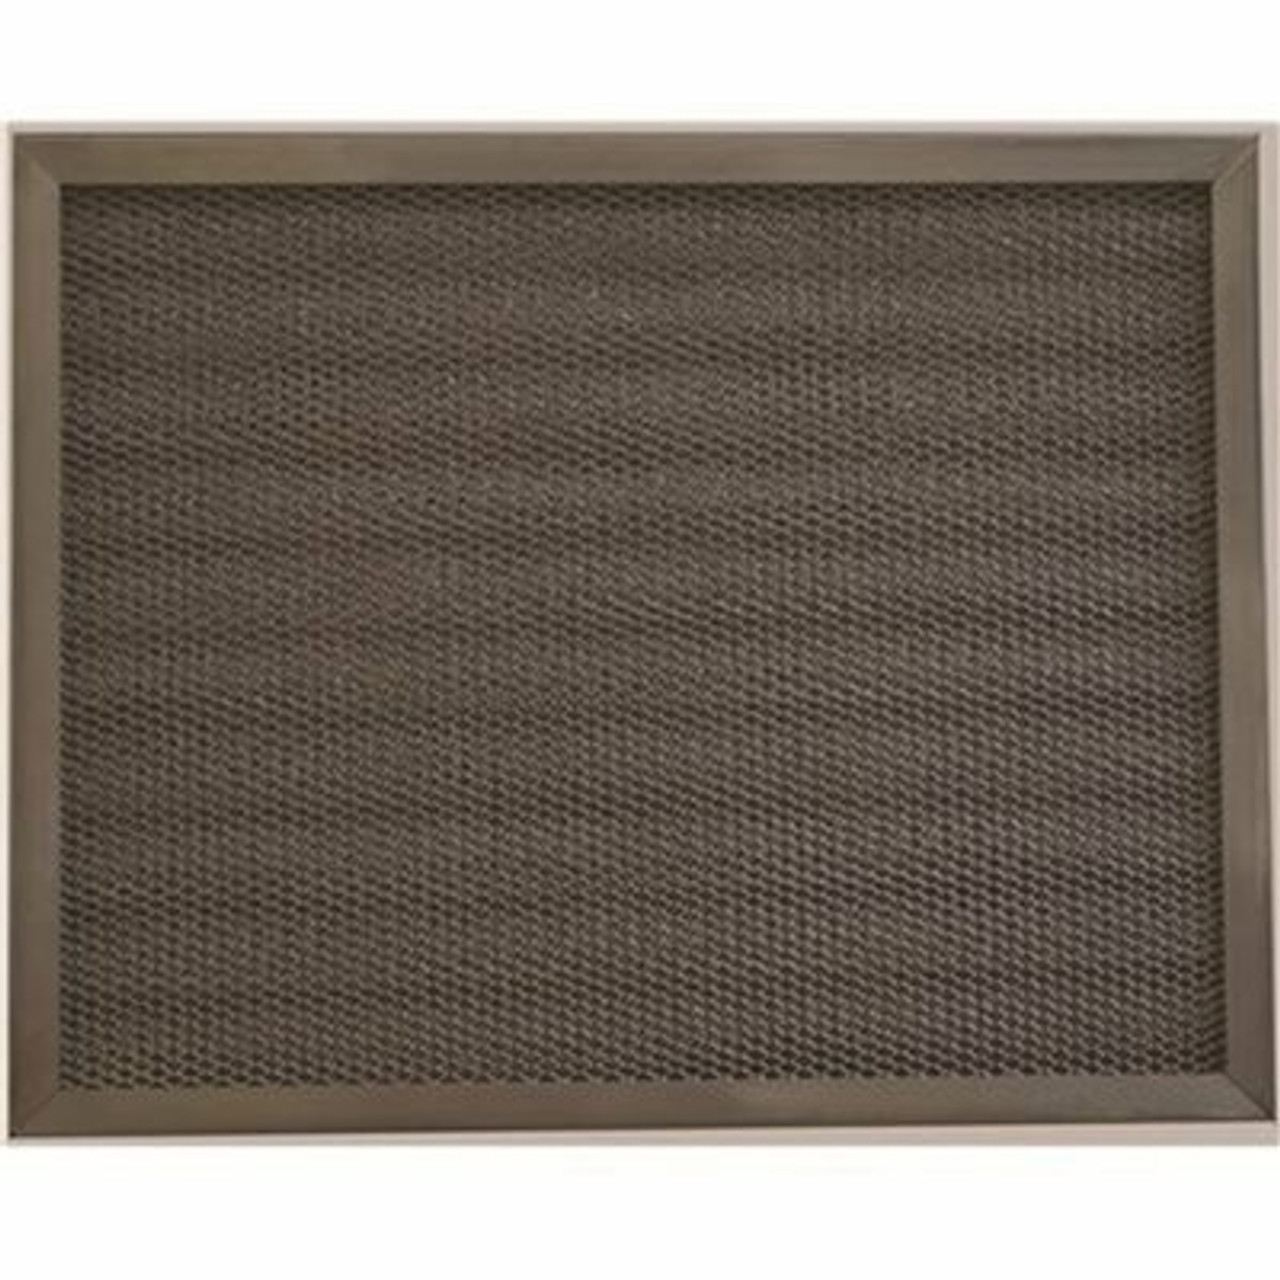 AAF Flanders 15 In. X 20 In. X 2 Washable Kkm MERV 4 Air Filter With Aluminum Frame (Case Of 6)